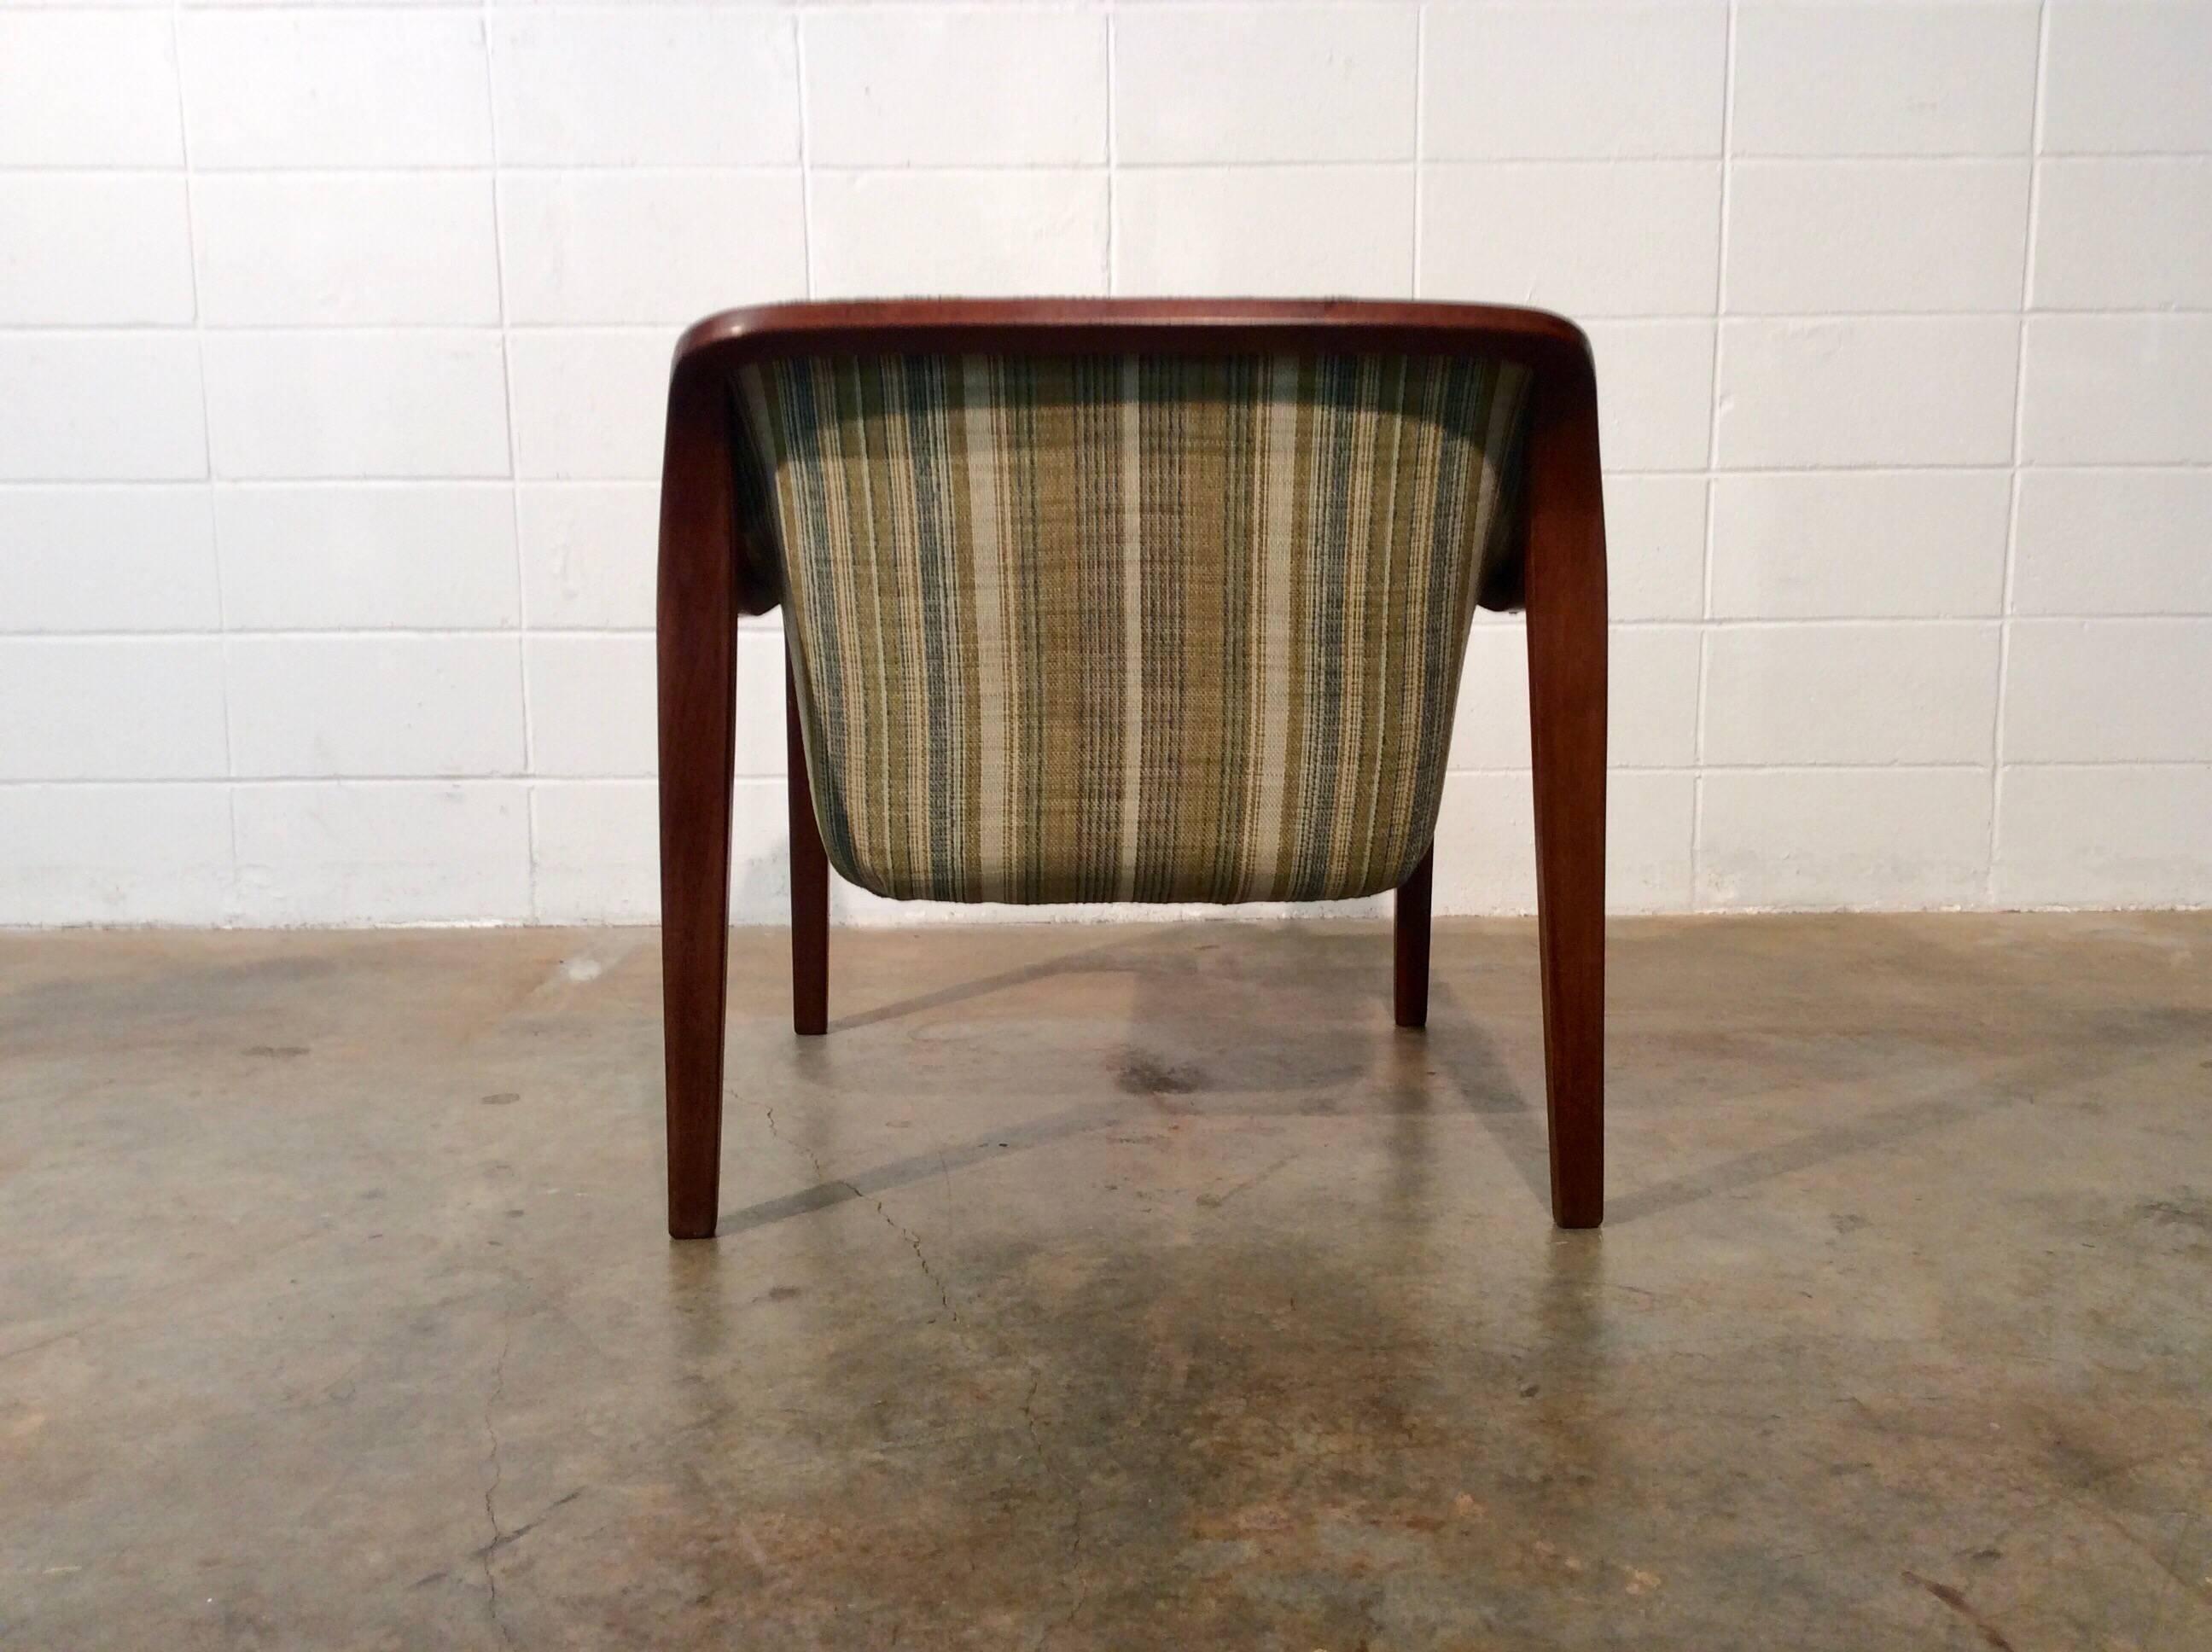 Restored Mid-Century Modern Bent Wood Lounge Chair, Bill Stephens for Knoll 1